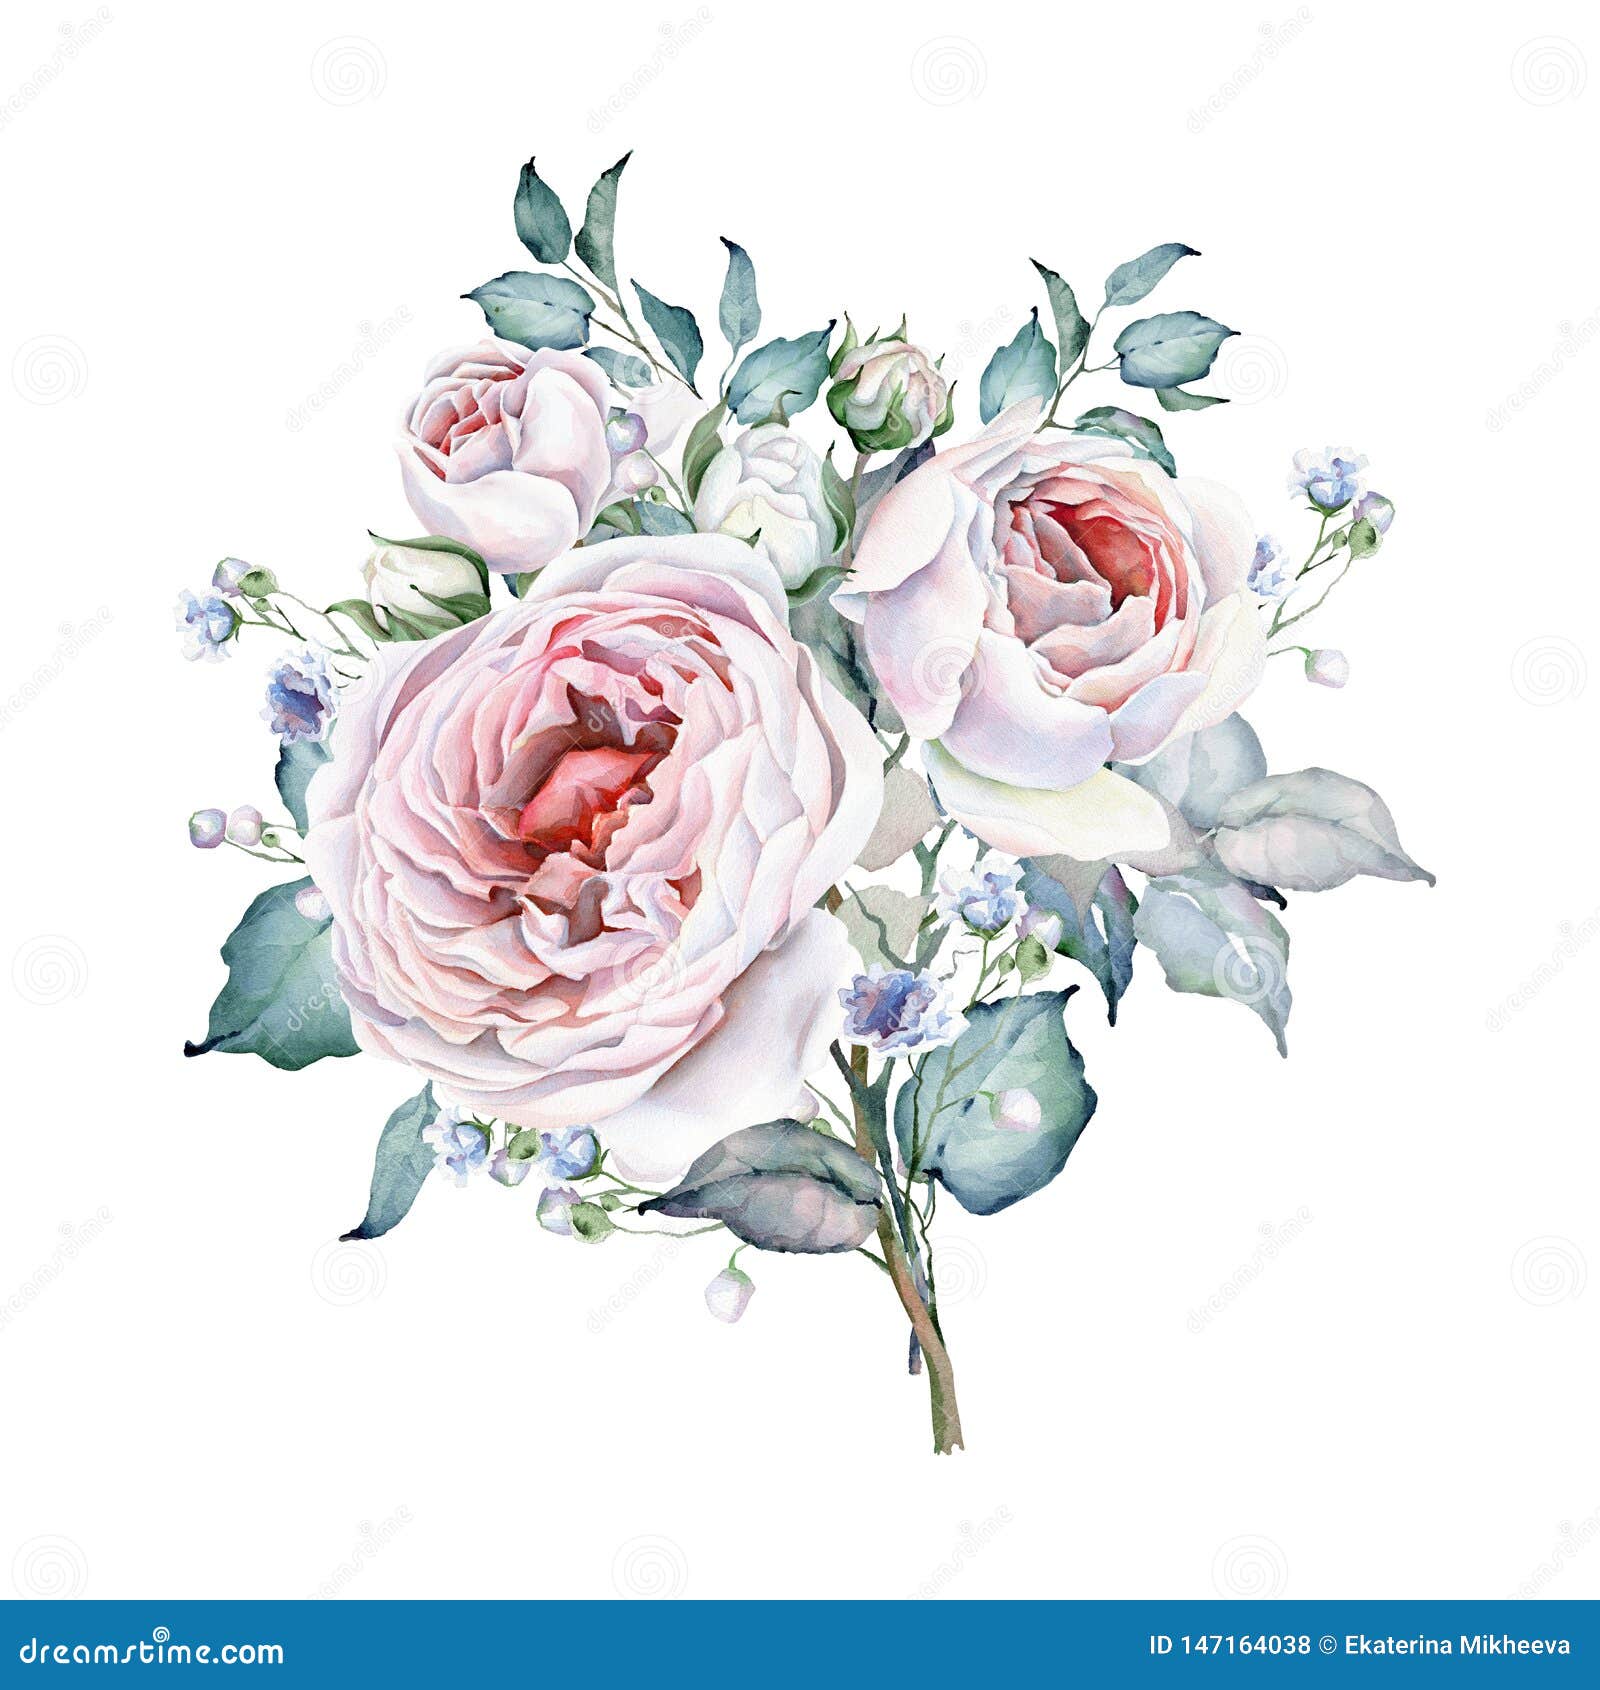 Roses Bouquet. Watercolor Flowers. White and Pink Roses Stock ...